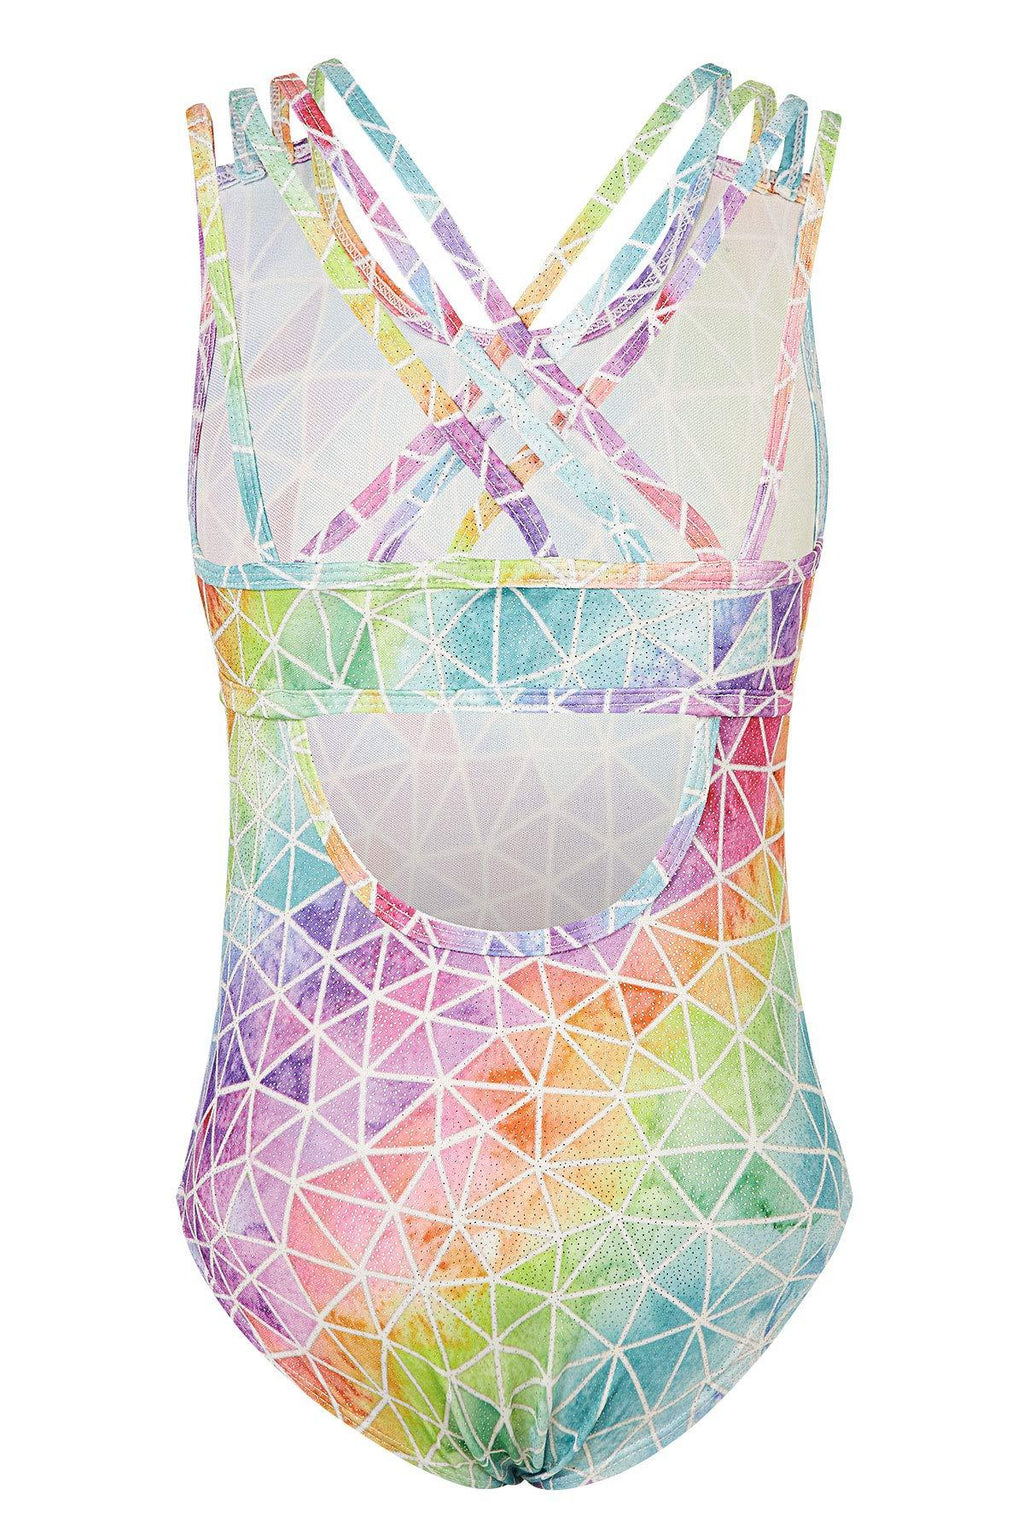 Gymnastics Leotards for Girls Criss Cross Straps Back Unitards Sparkly Ballet Dance Outfits Clothes 3-9T Geometric Graphic Printed 3-4T - BeesActive Australia